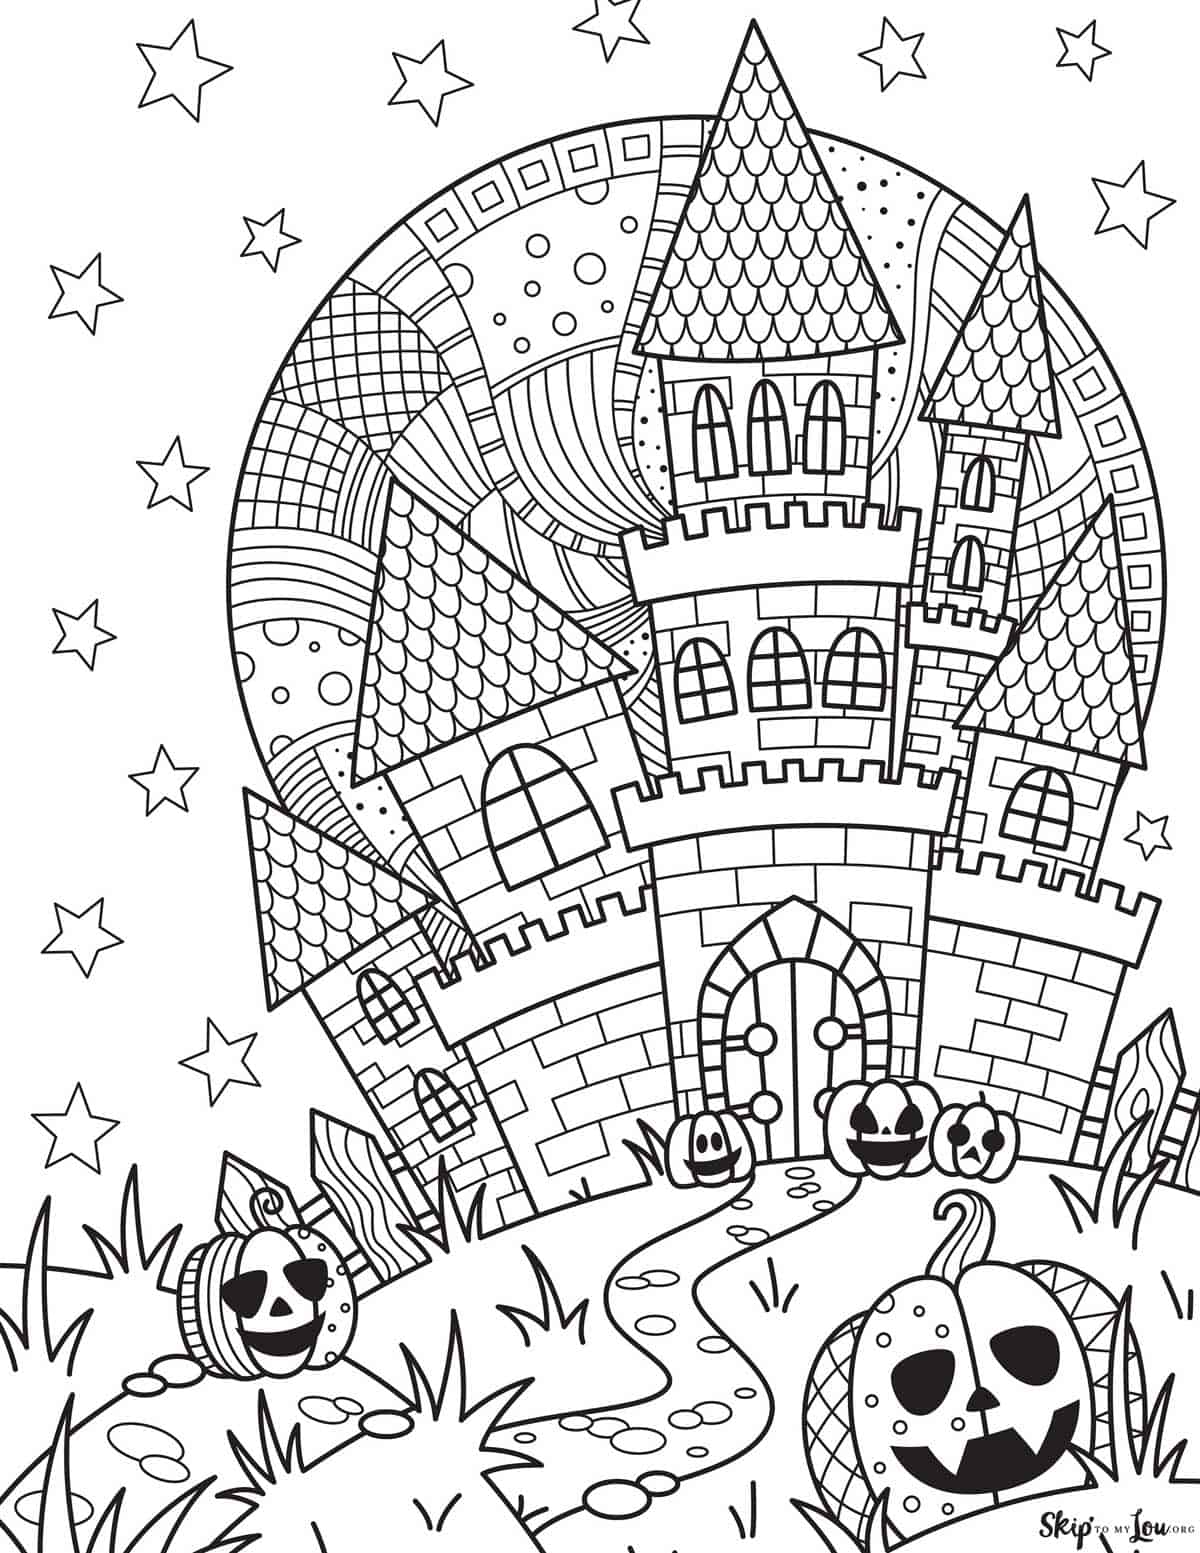 Cute Halloween Coloring Pages To Print And Color Skip To My Lou